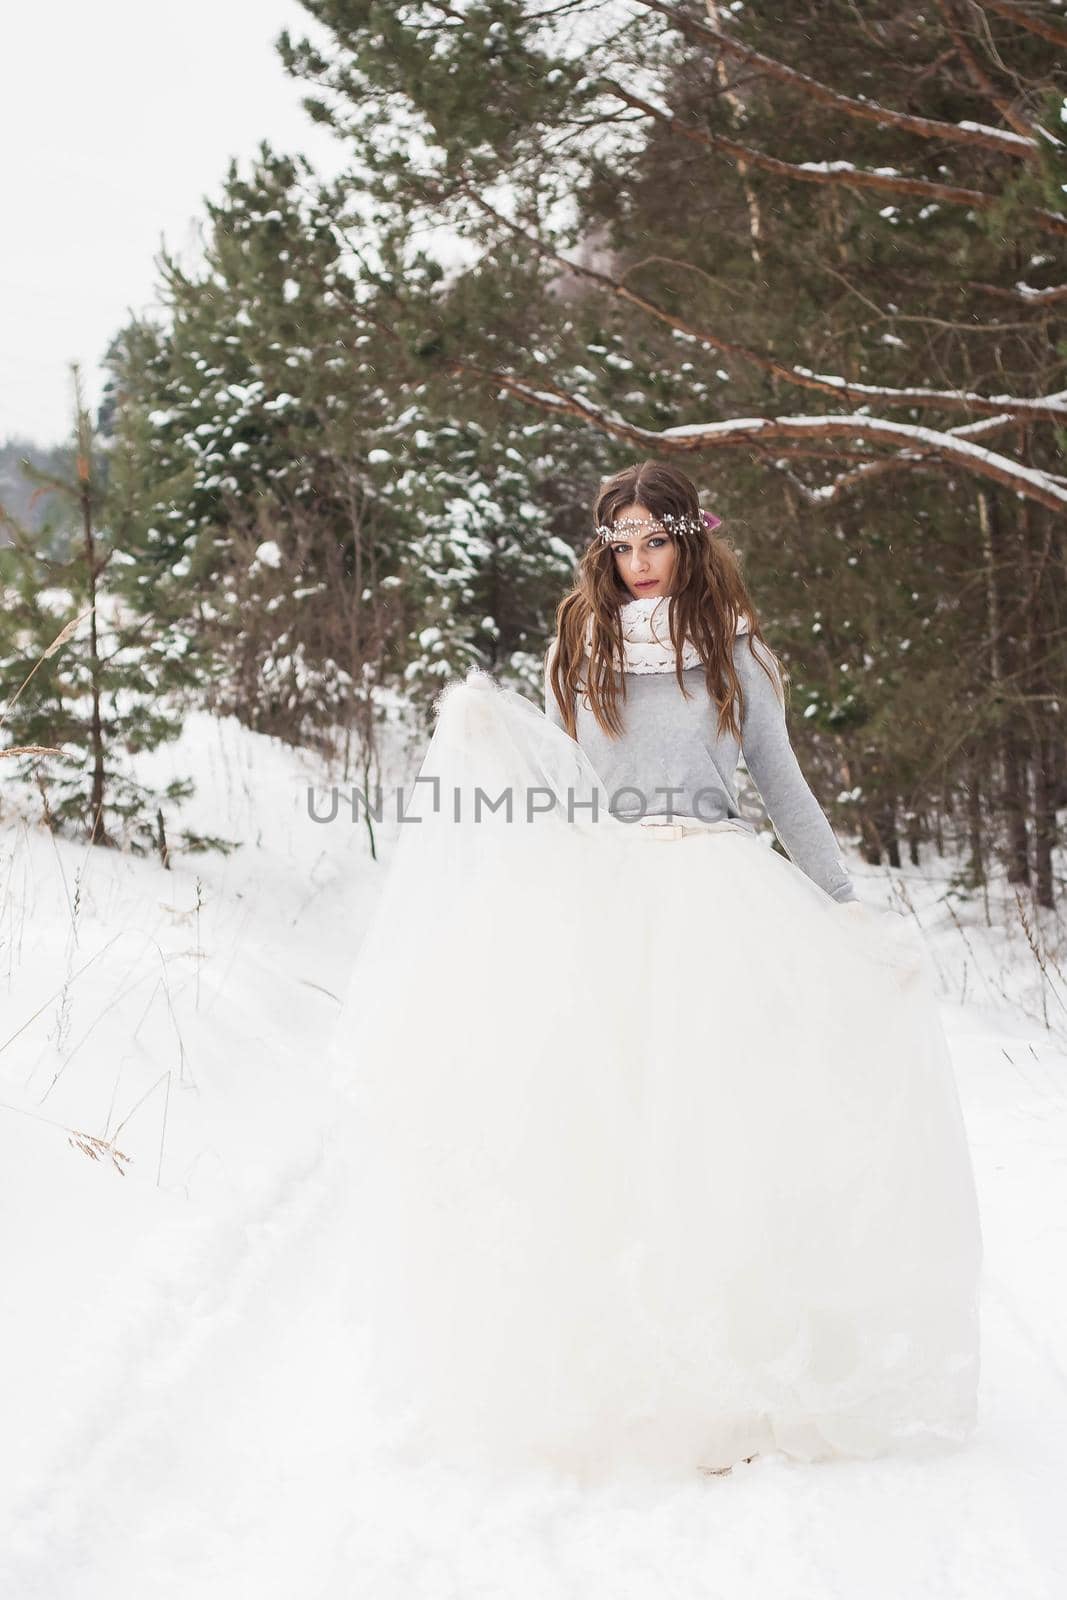 Beautiful bride in a white dress with a bouquet in a snow-covered winter forest. Portrait of the bride in nature by Annu1tochka